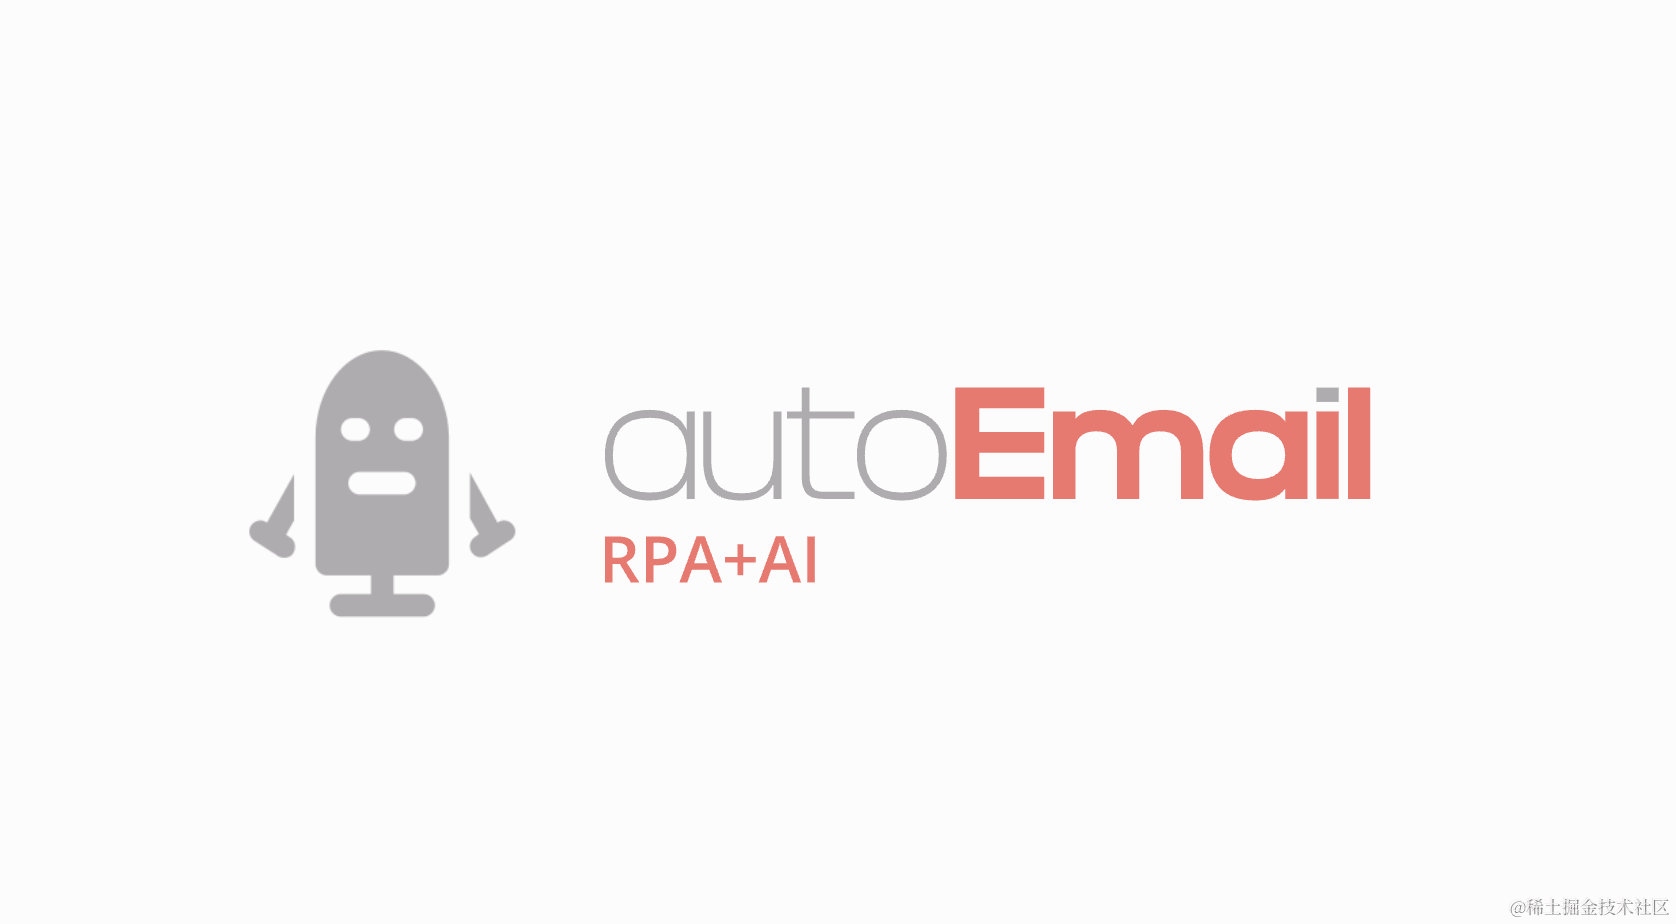 autoEmail_logo.png